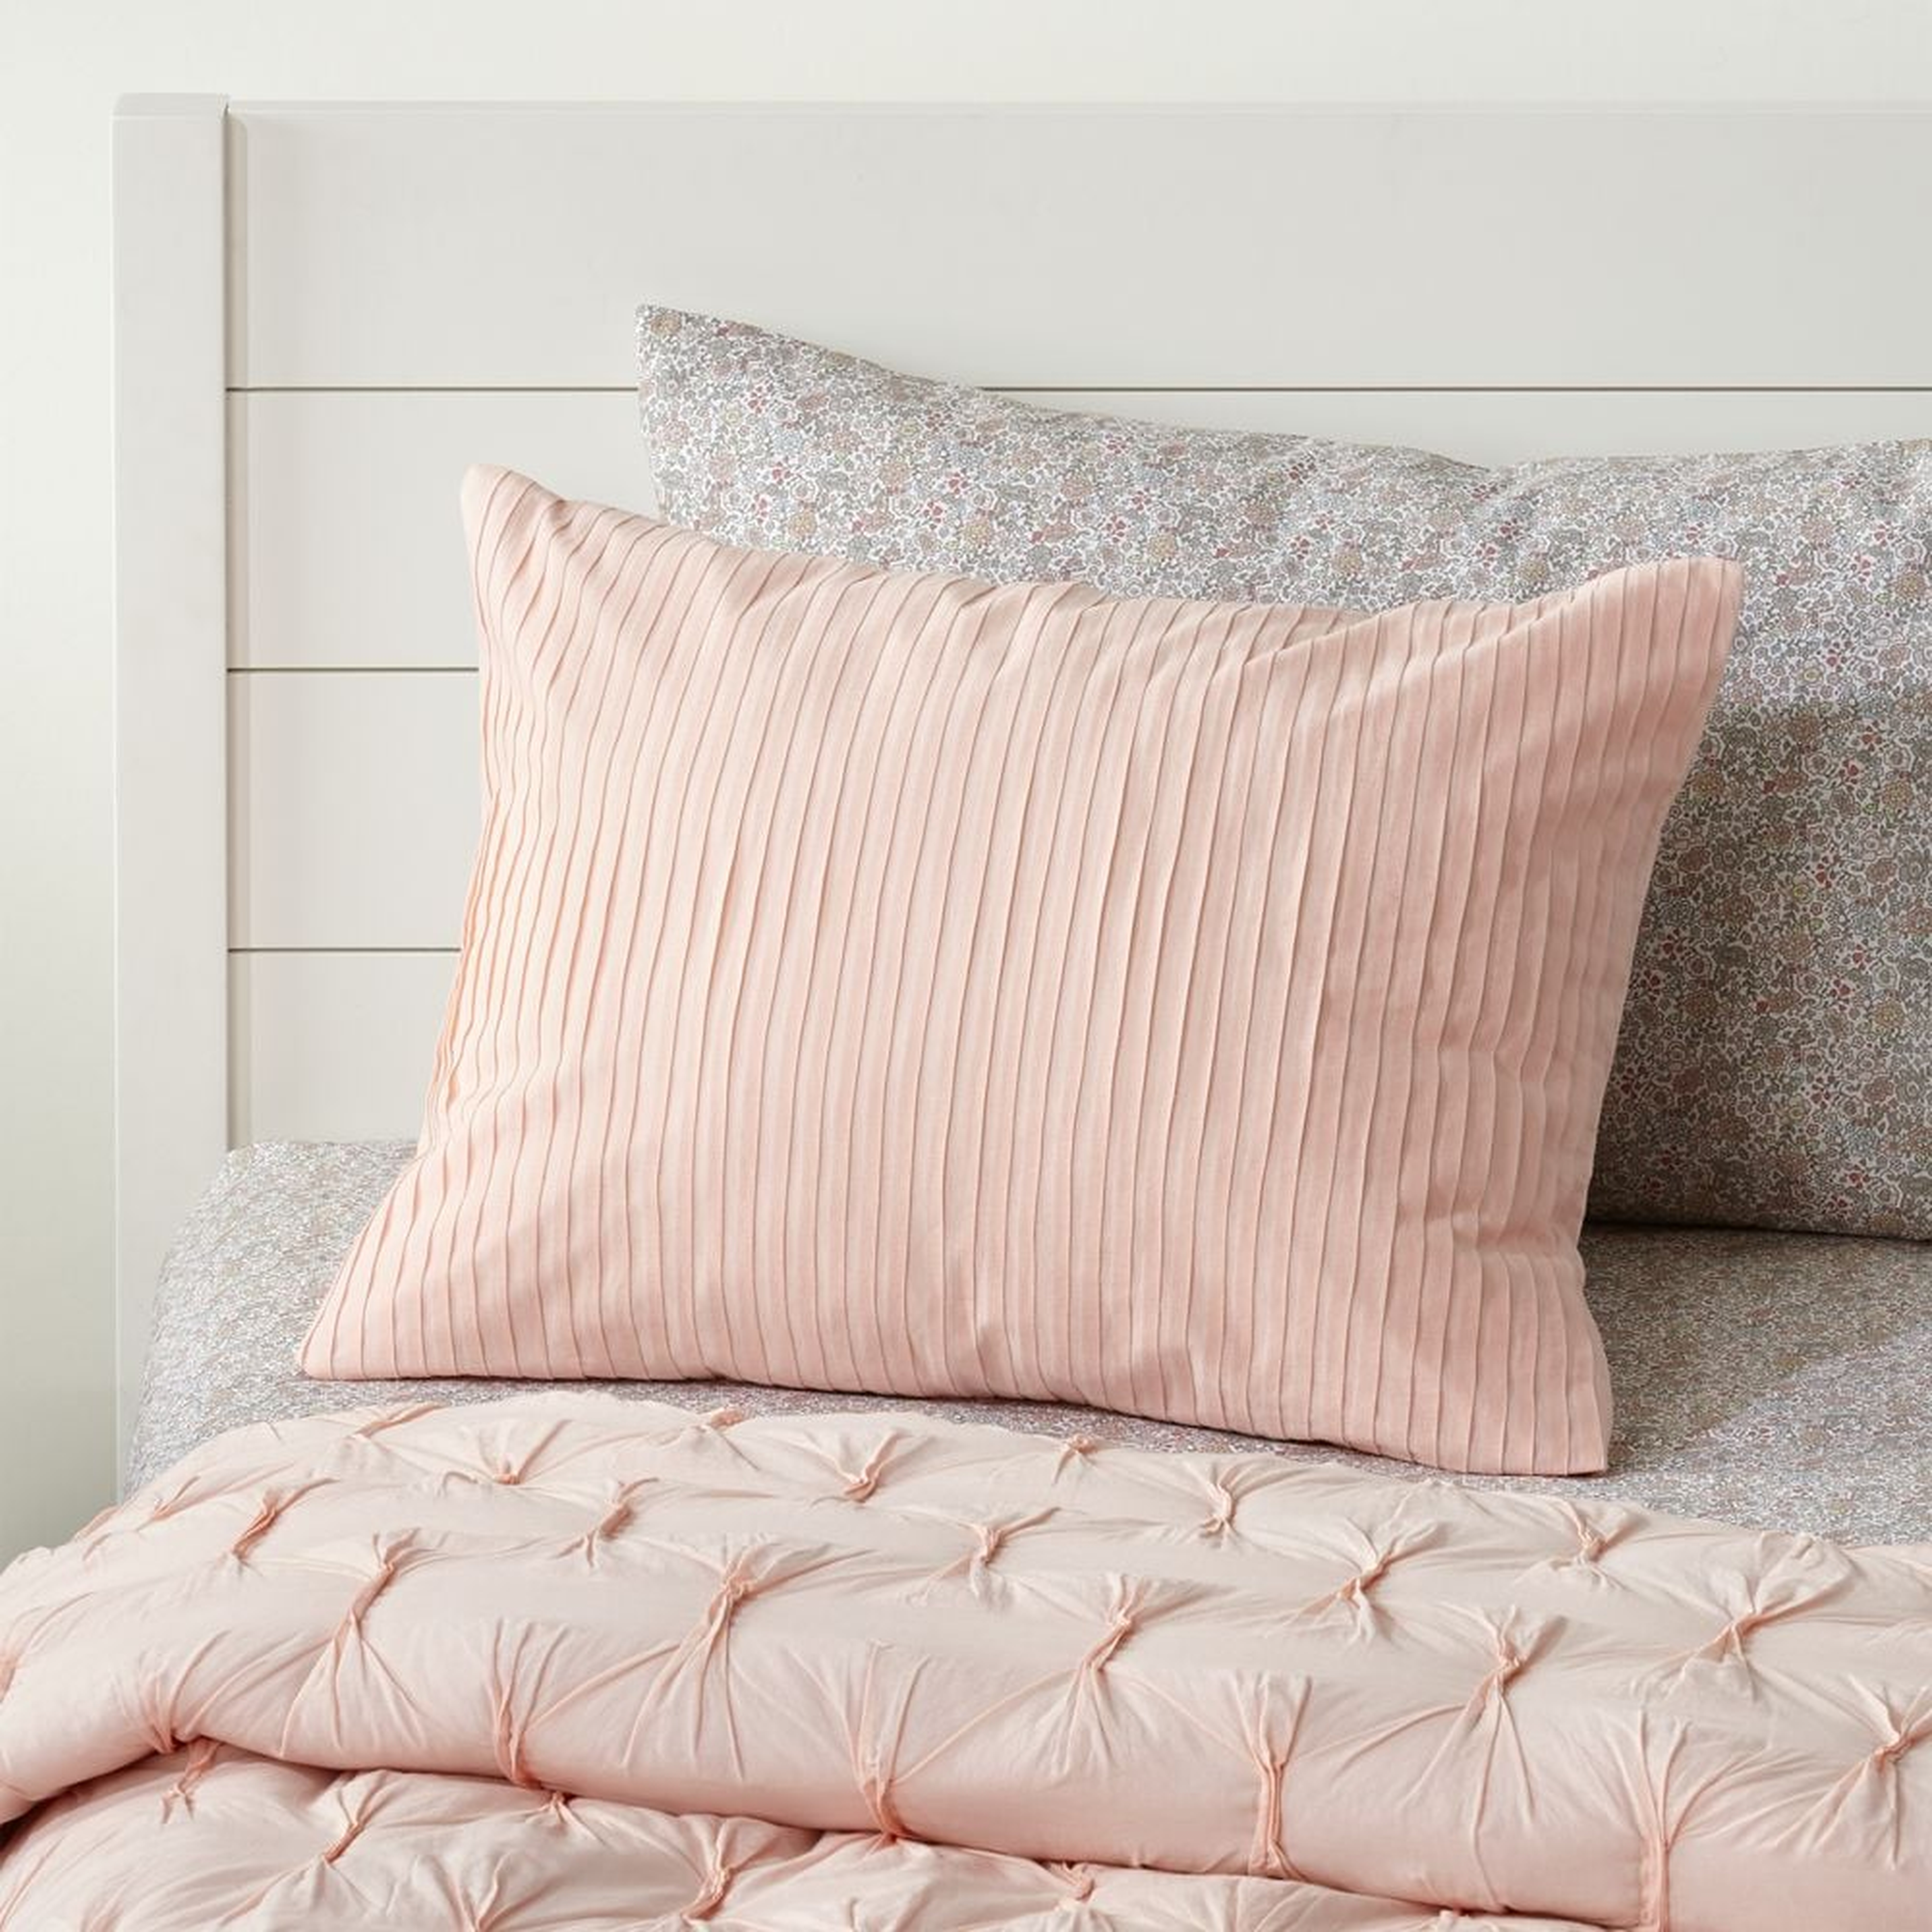 Chic Pleated Pink Sham - Crate and Barrel